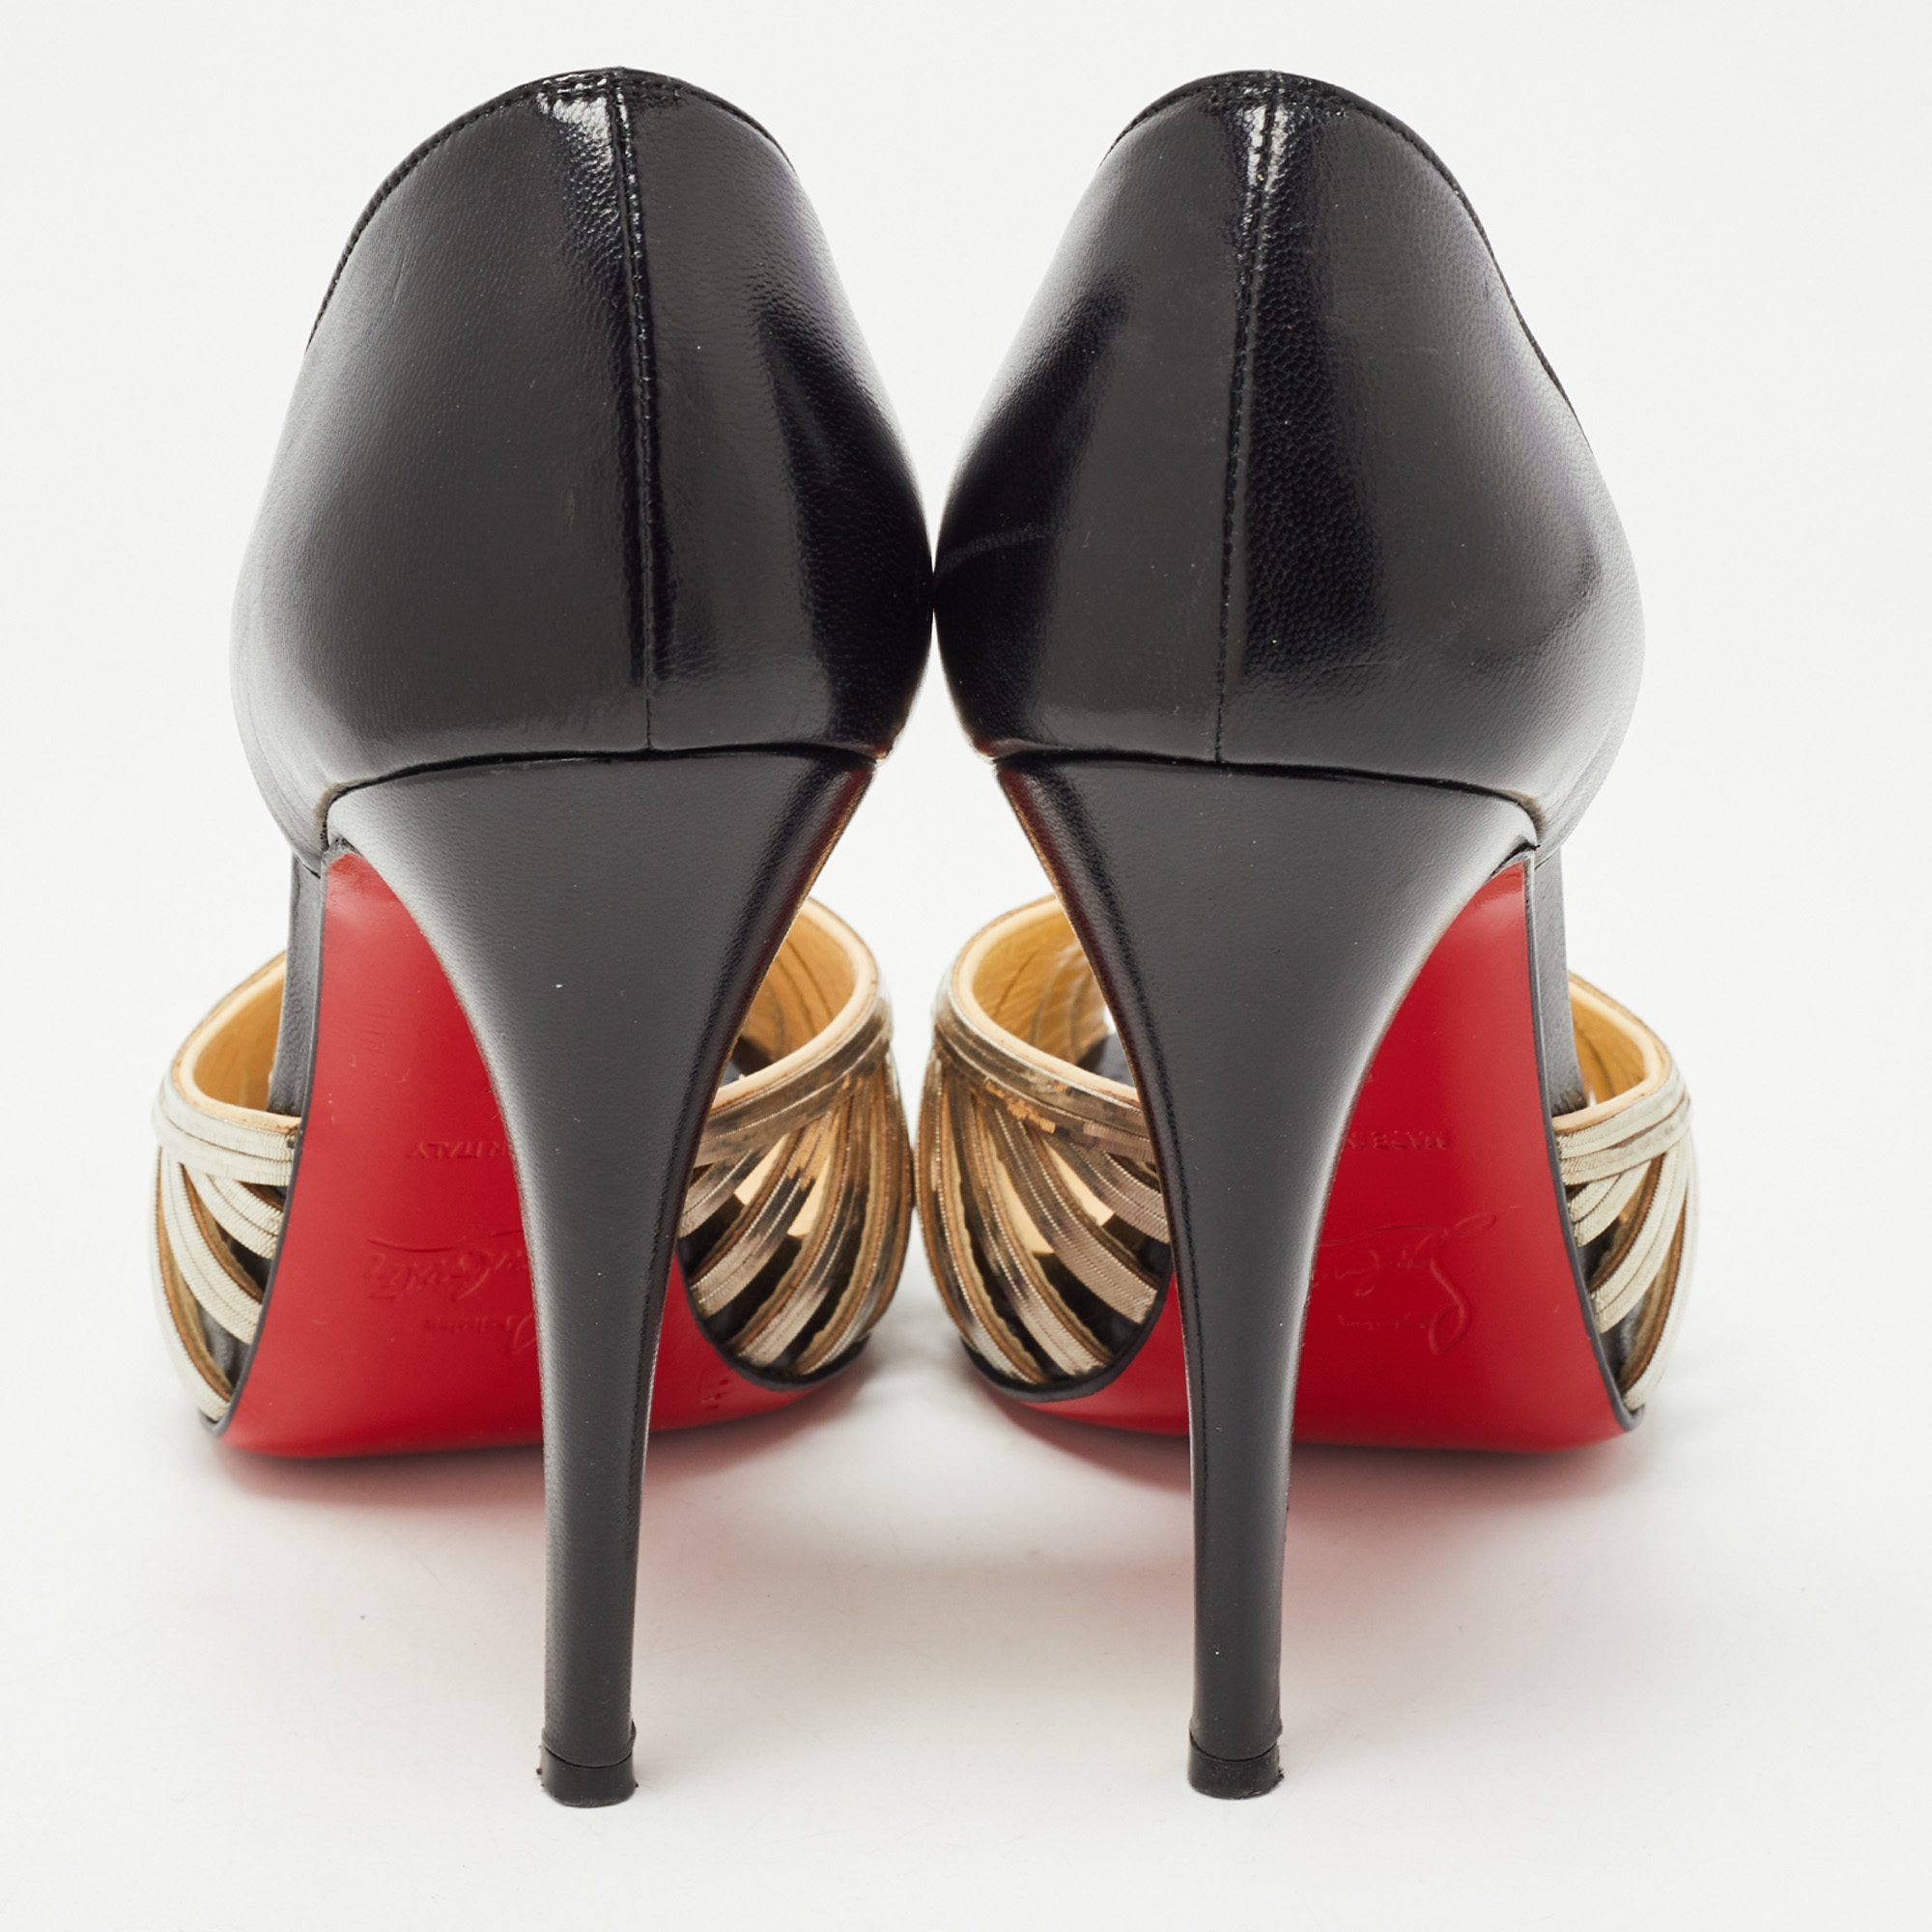 Christian Louboutin Black/Gold Leather And Metal Corpus Pumps Size 37